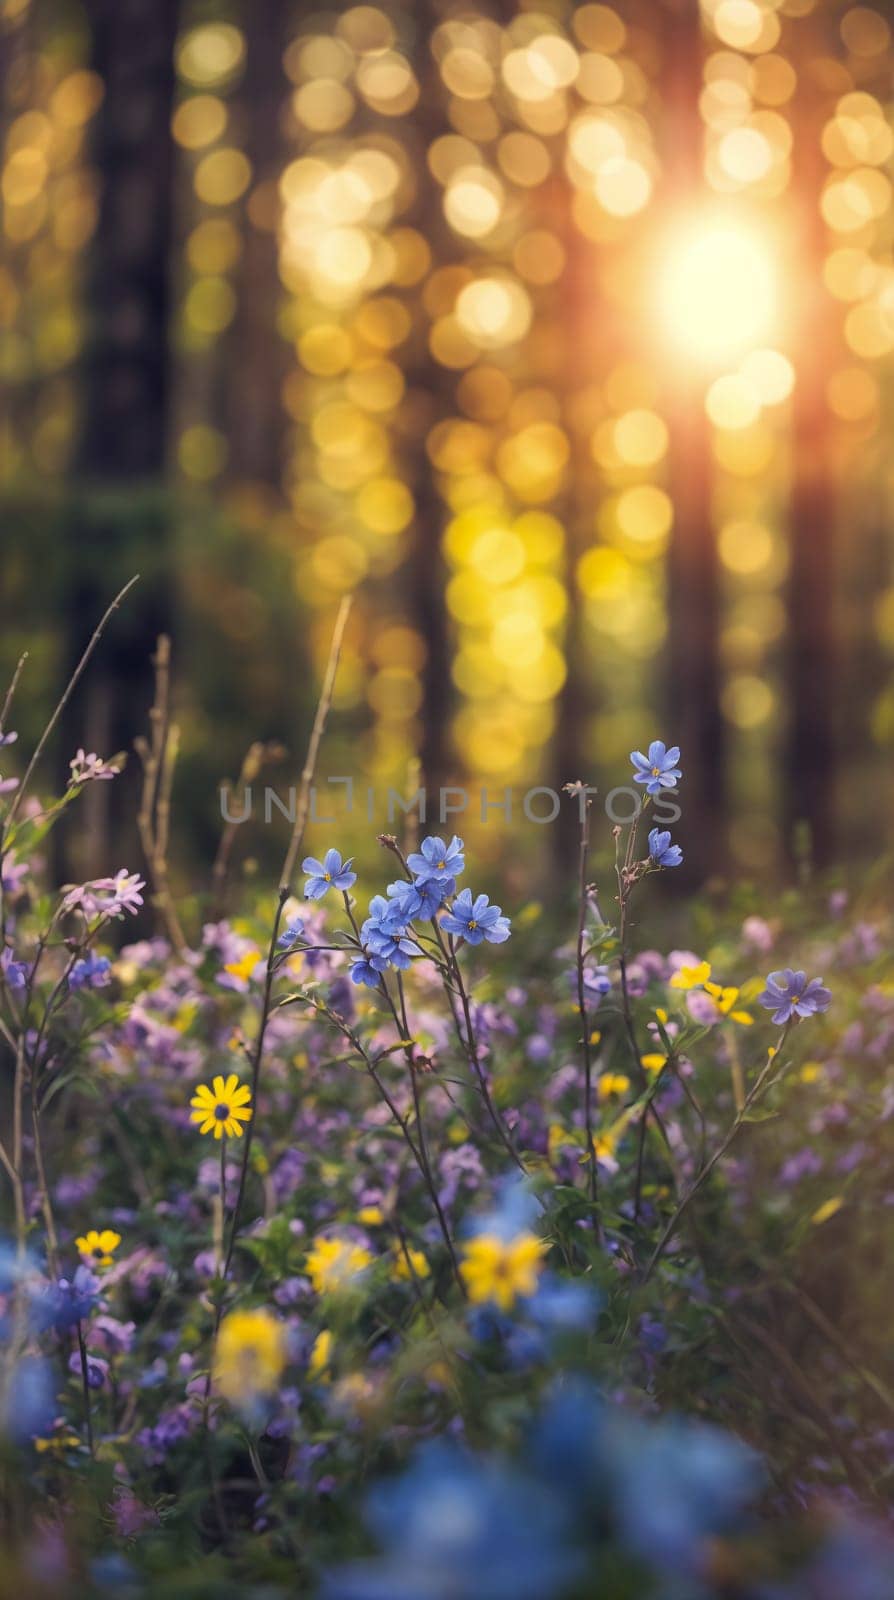 Vibrant Field of Blue and Yellow Flowers by chrisroll